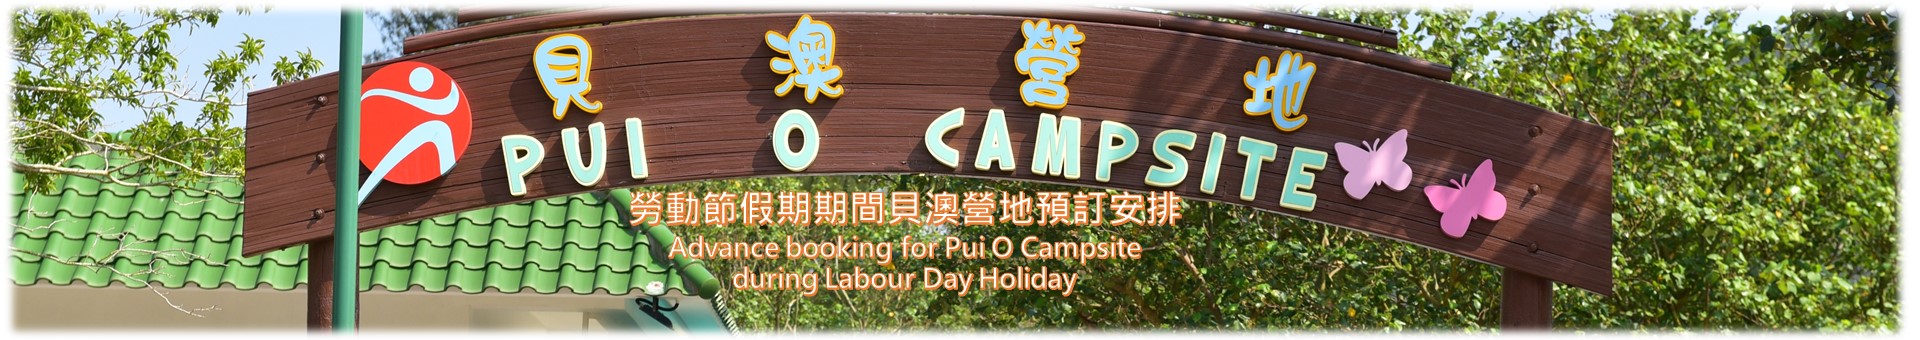 Advance booking for Pui O Campsite during Labour Day Holiday